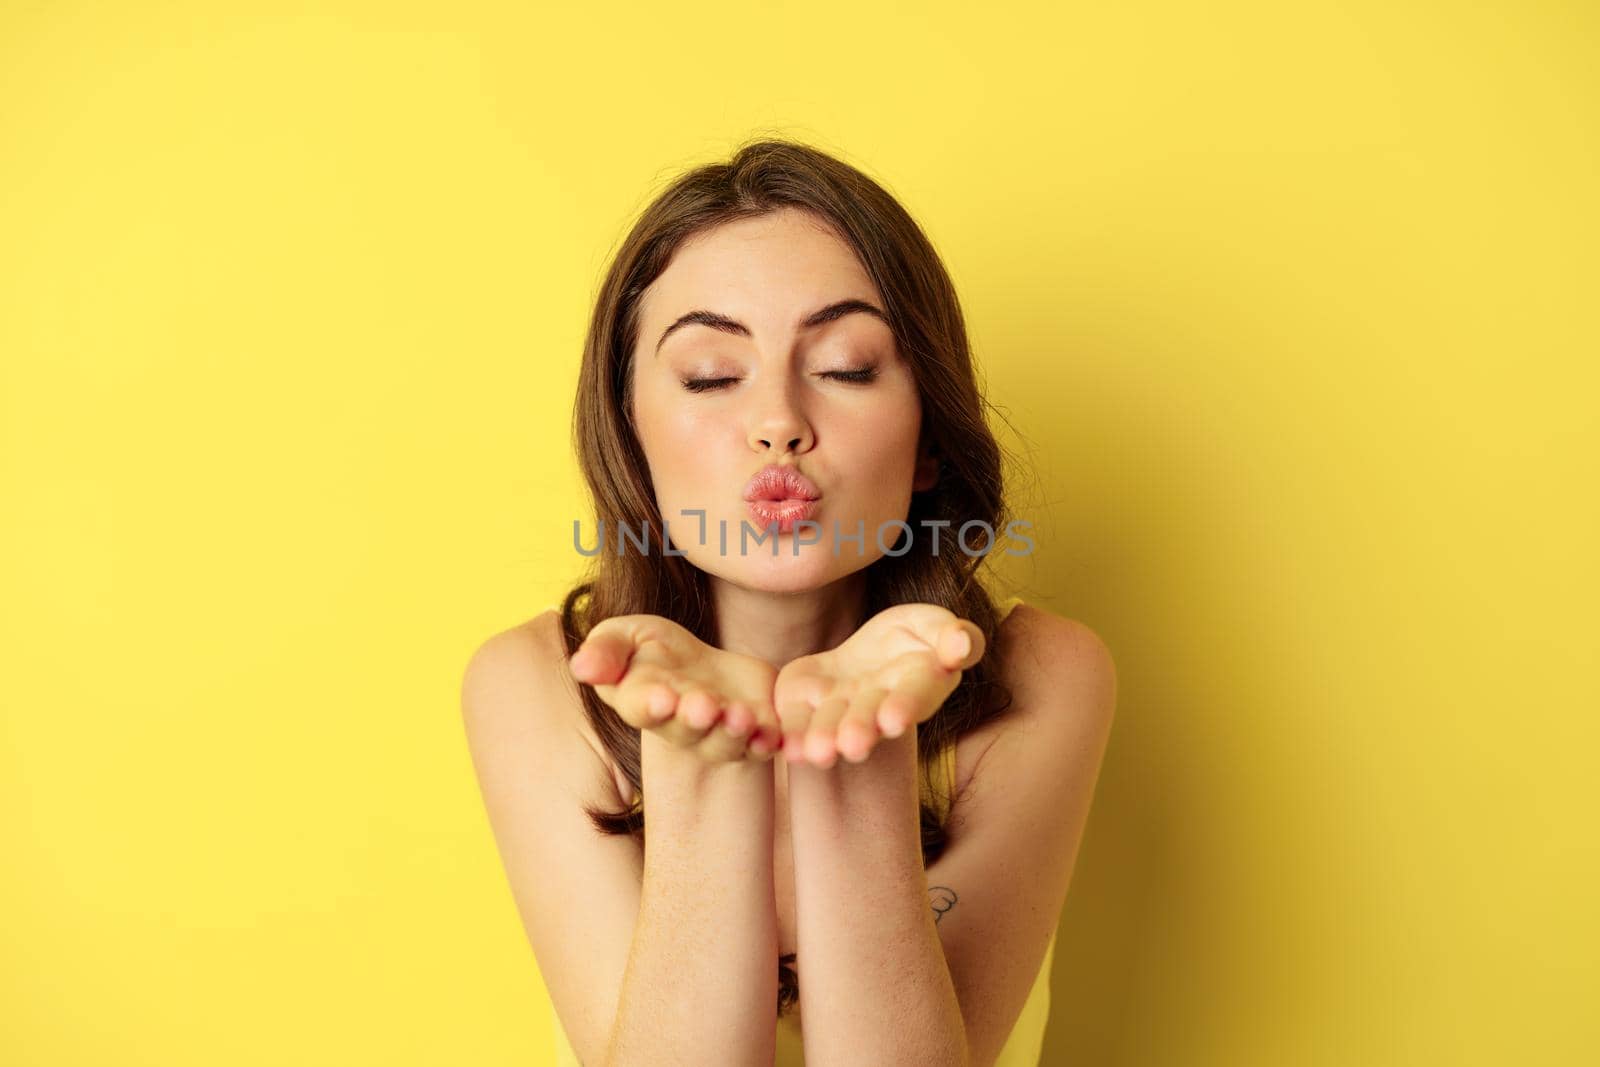 Close up portrait of beautiful, coquettish woman sending air kiss, blowing mwah at camera, standing over yellow background. Copy space